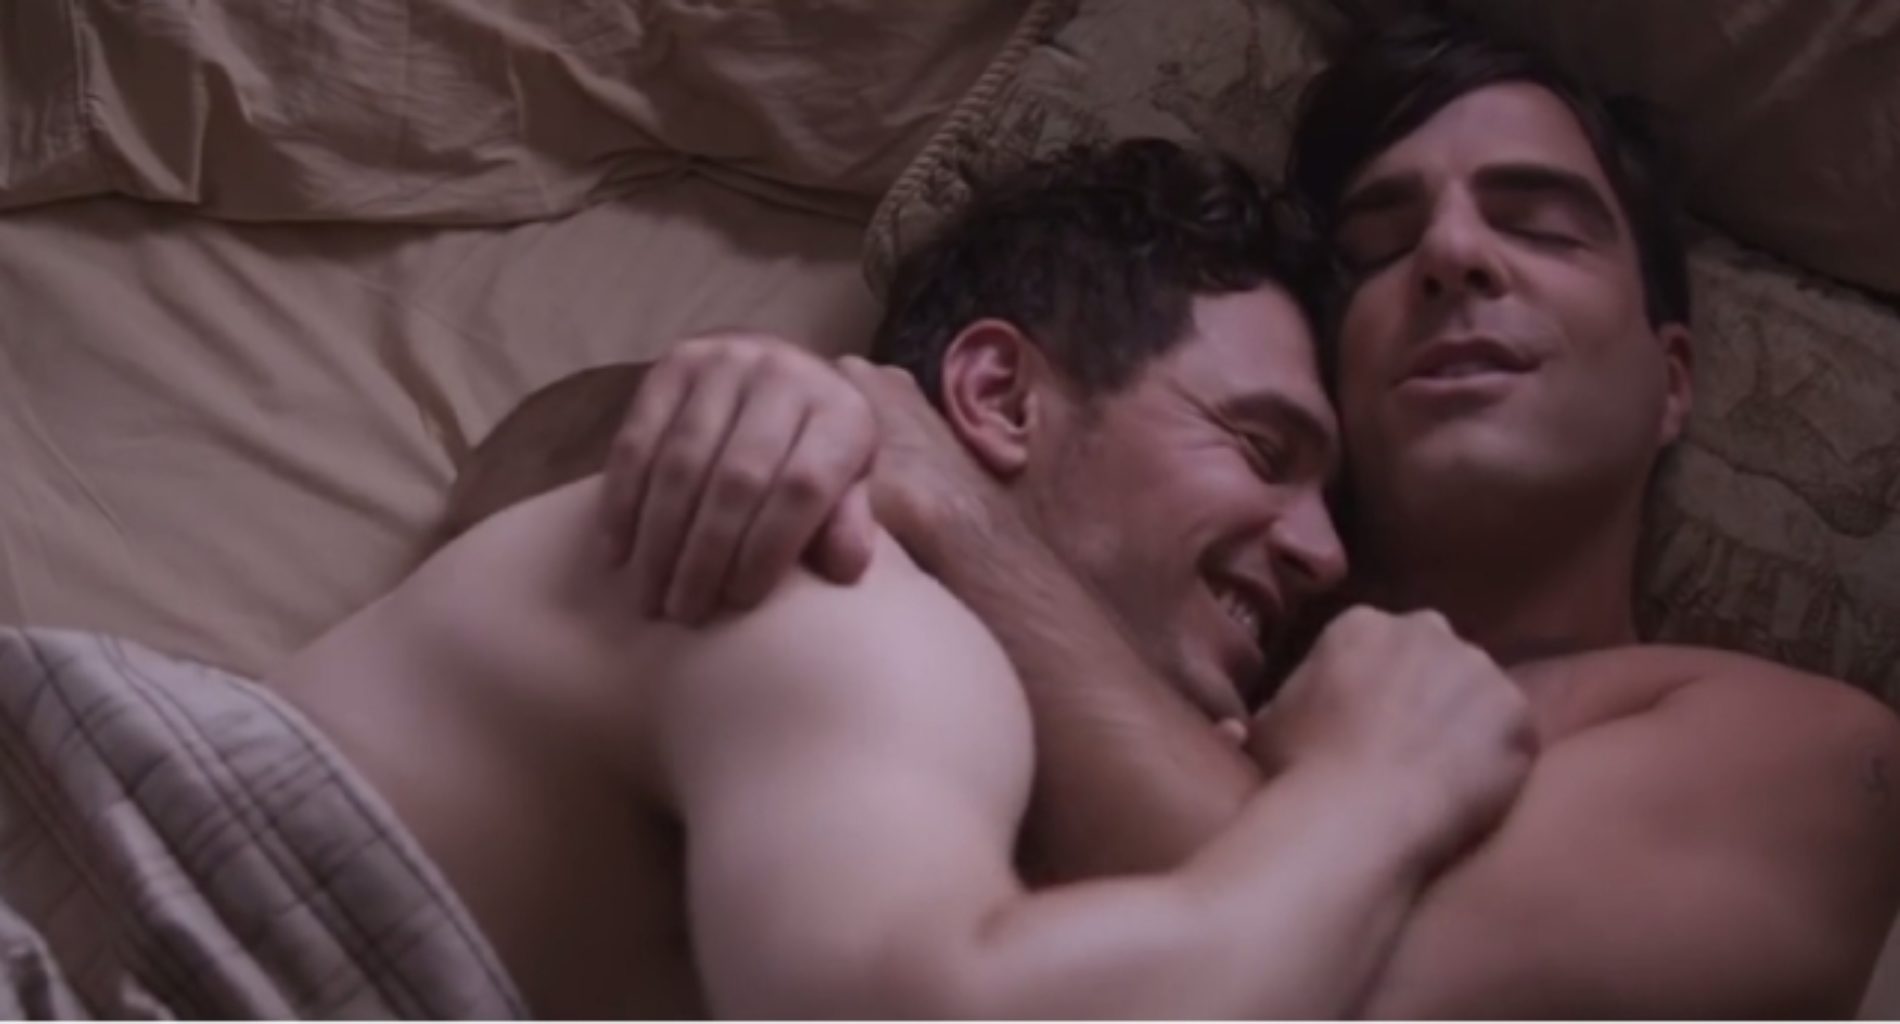 “Are You Still Attracted To Men?” James Franco’s New Film ‘I Am Michael’ Seeks To Answer this Question